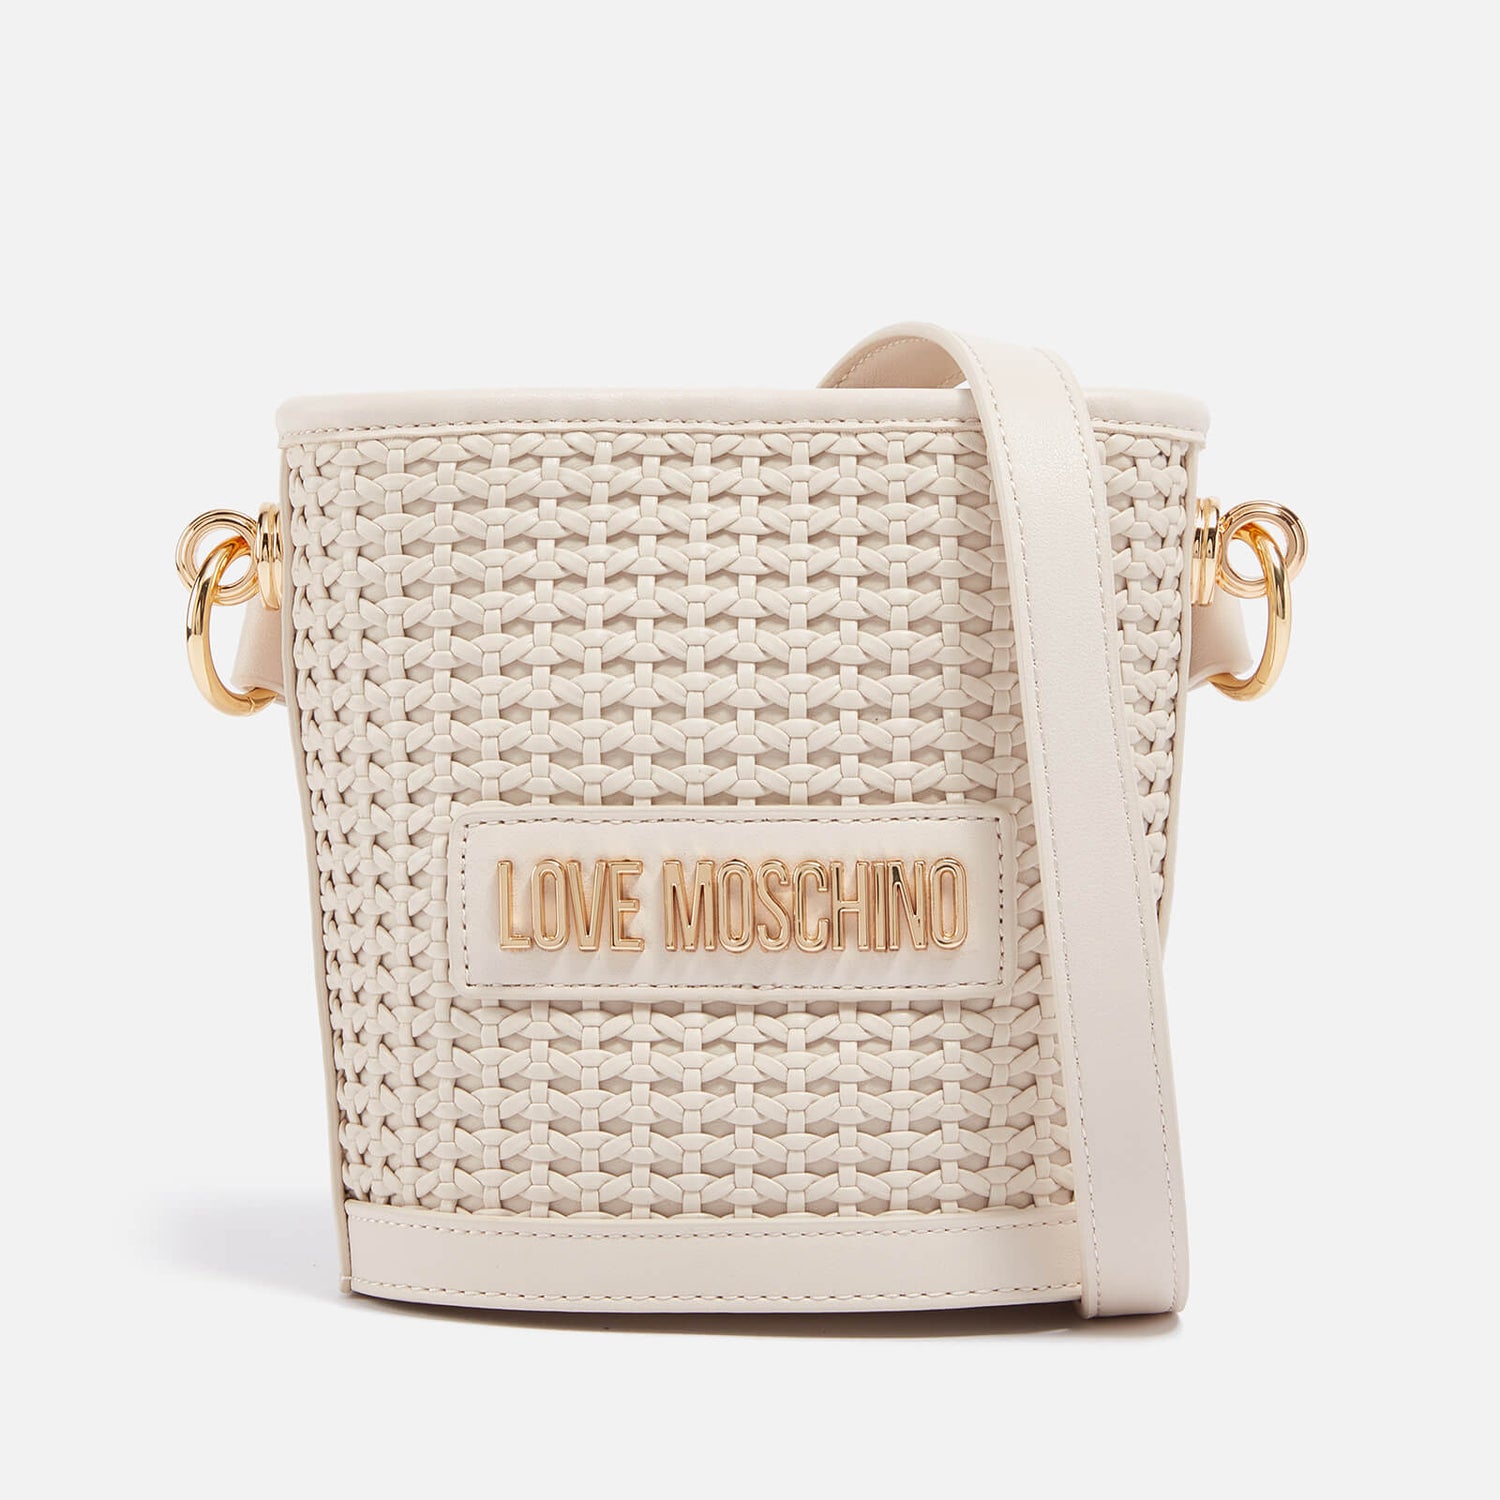 Love Moschino Knots Faux Leather Bucket Bag